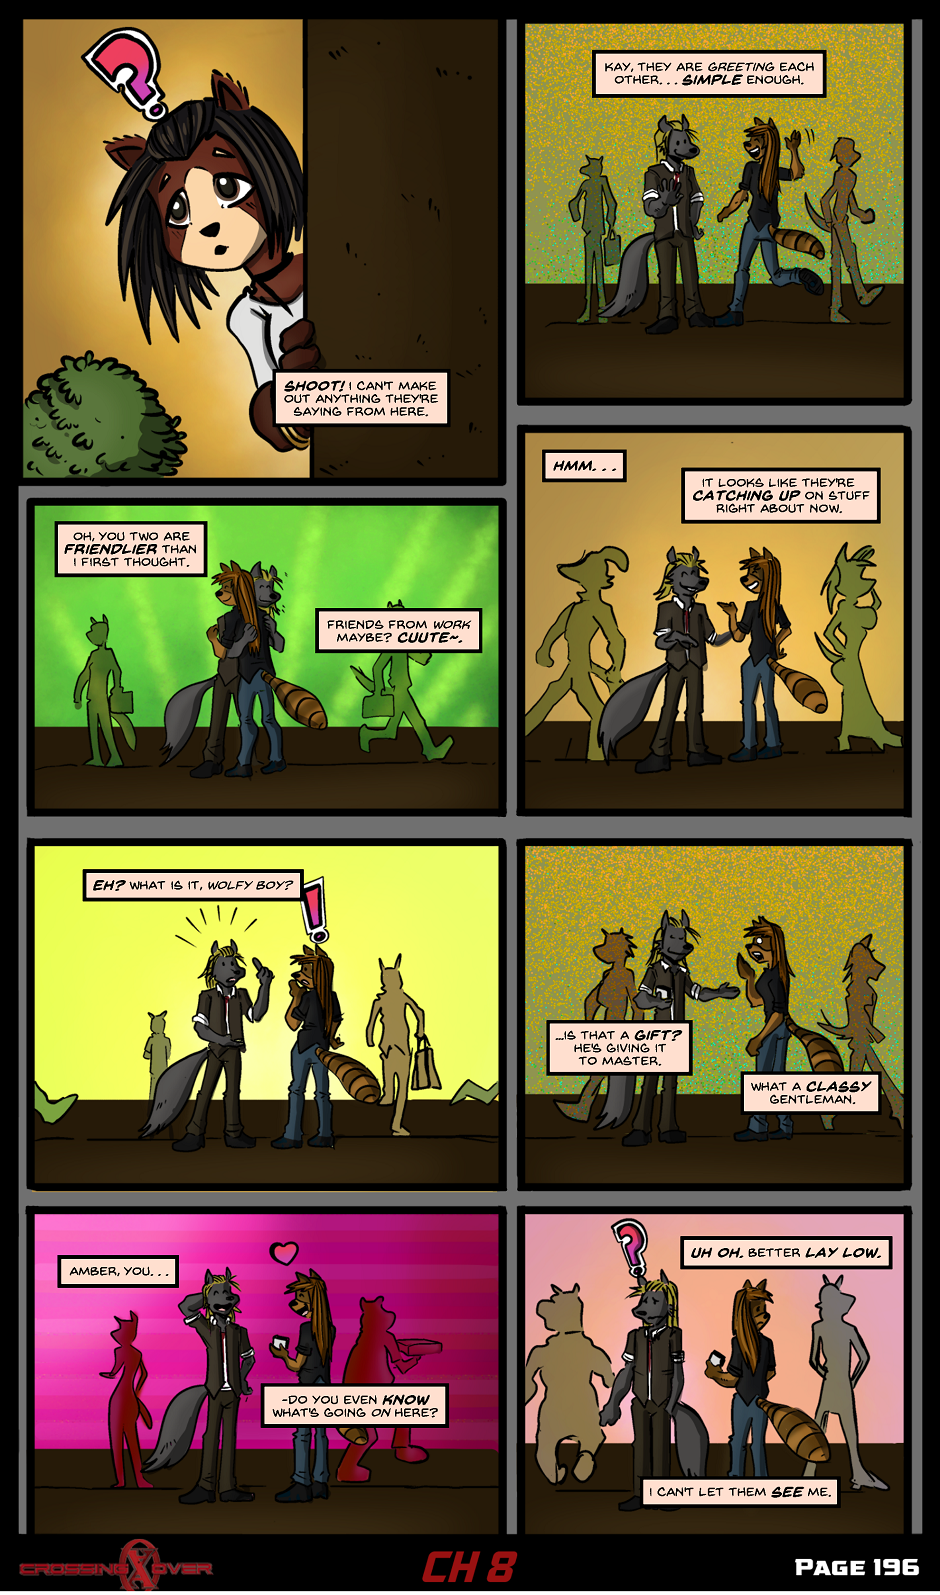 Page 196 (Ch 8)